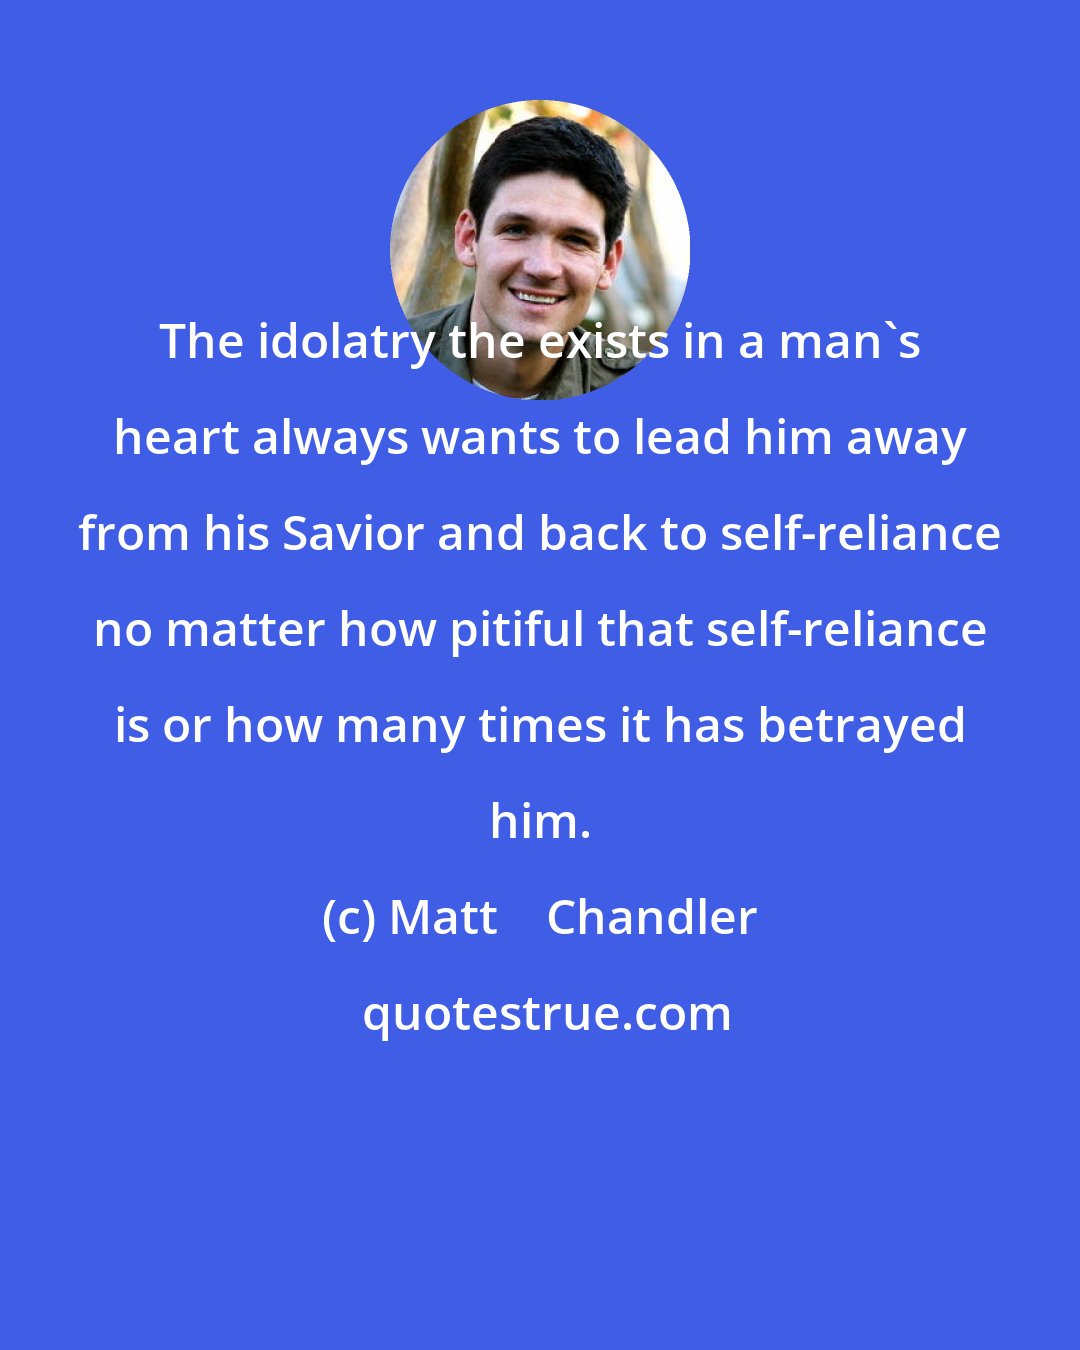 Matt    Chandler: The idolatry the exists in a man's heart always wants to lead him away from his Savior and back to self-reliance no matter how pitiful that self-reliance is or how many times it has betrayed him.